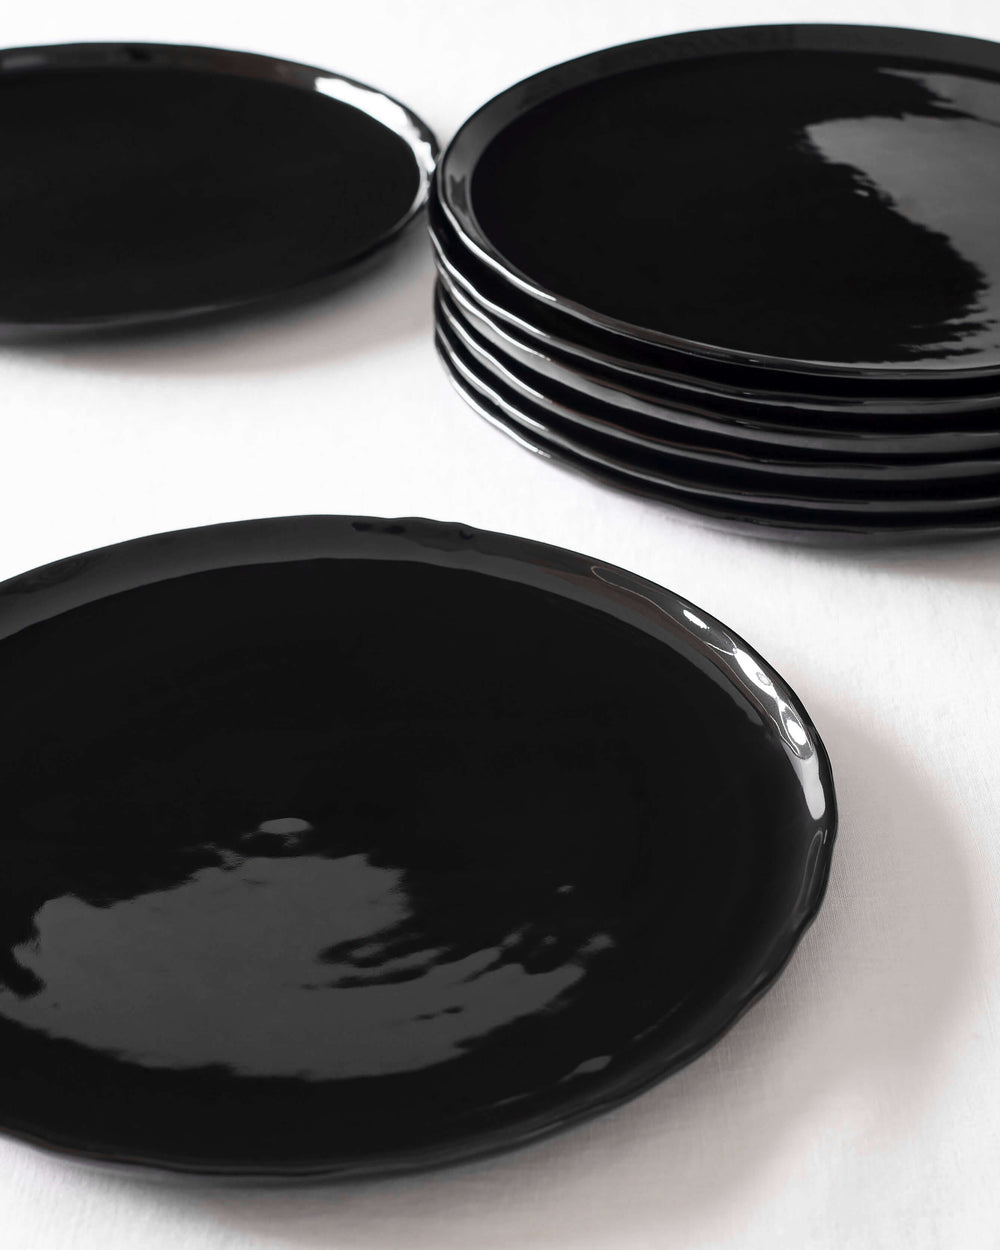 Modern, black Riad Dinner Plates by Fairkind. Handcrafted in Morocco and finished with a shiny glaze.